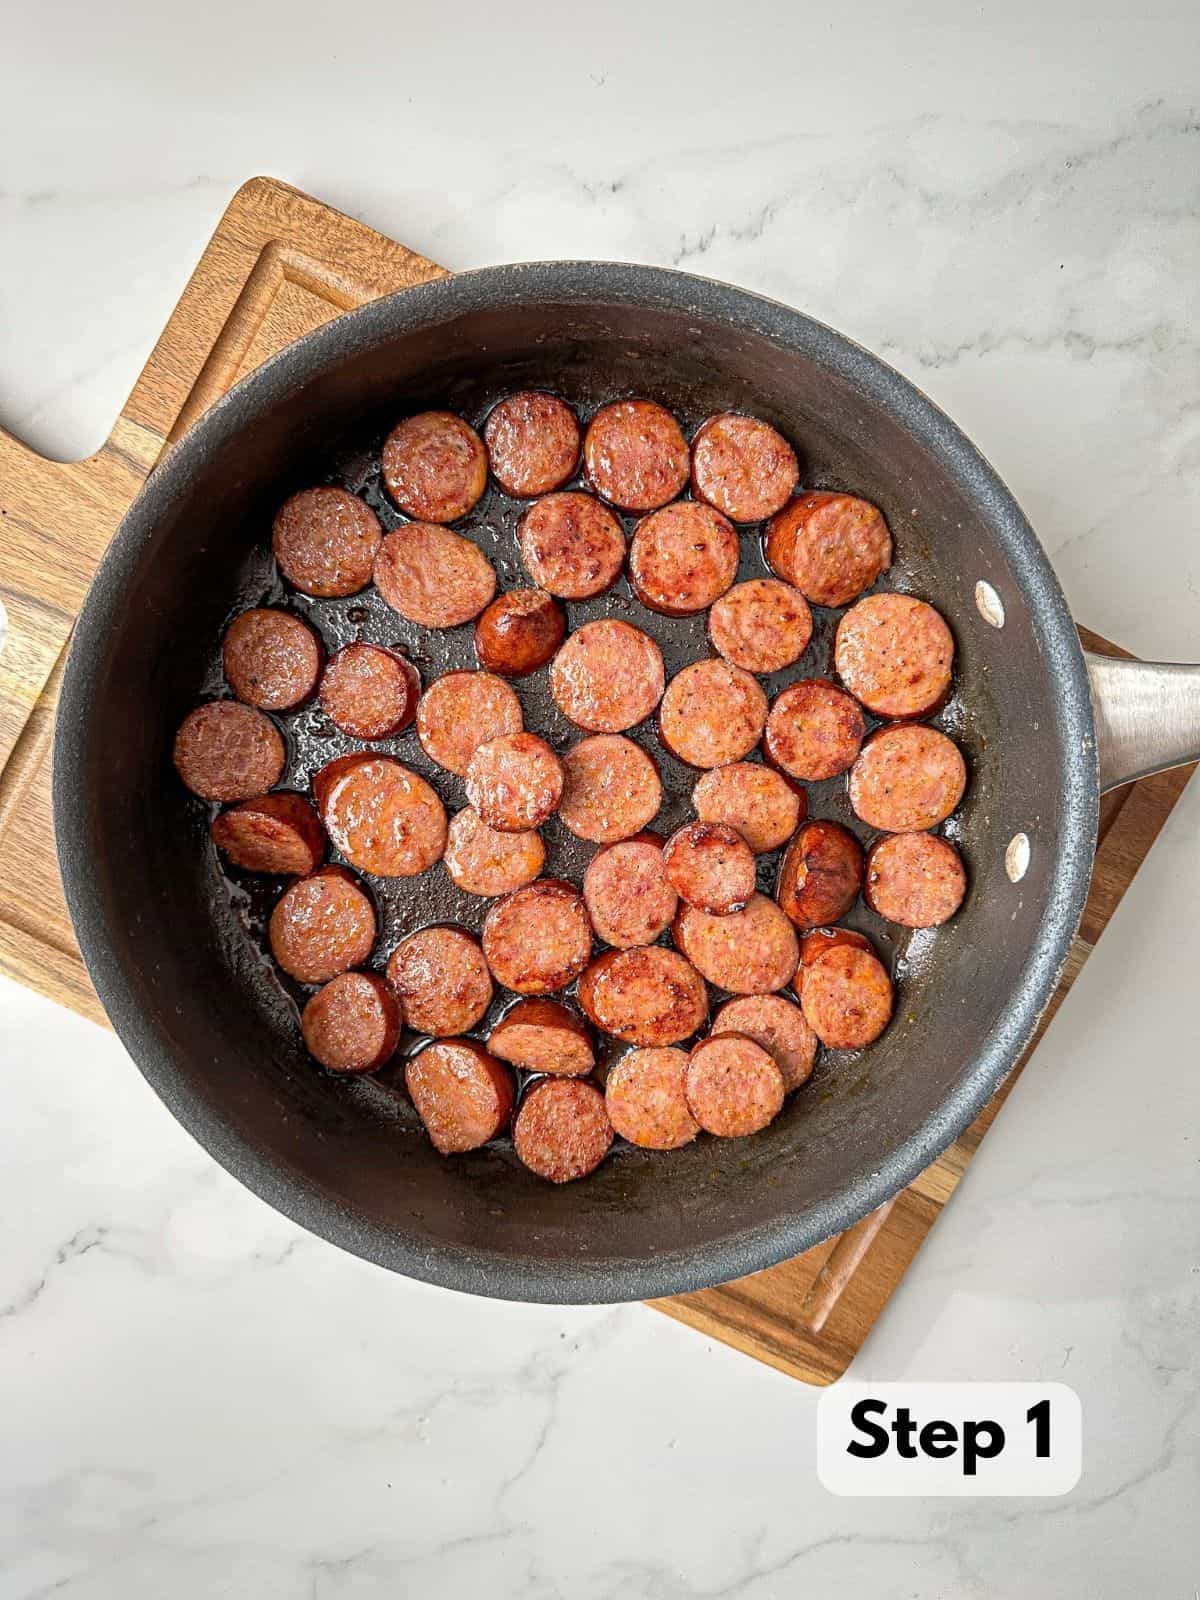 Slices of andouille sausage cooking in a large skillet.